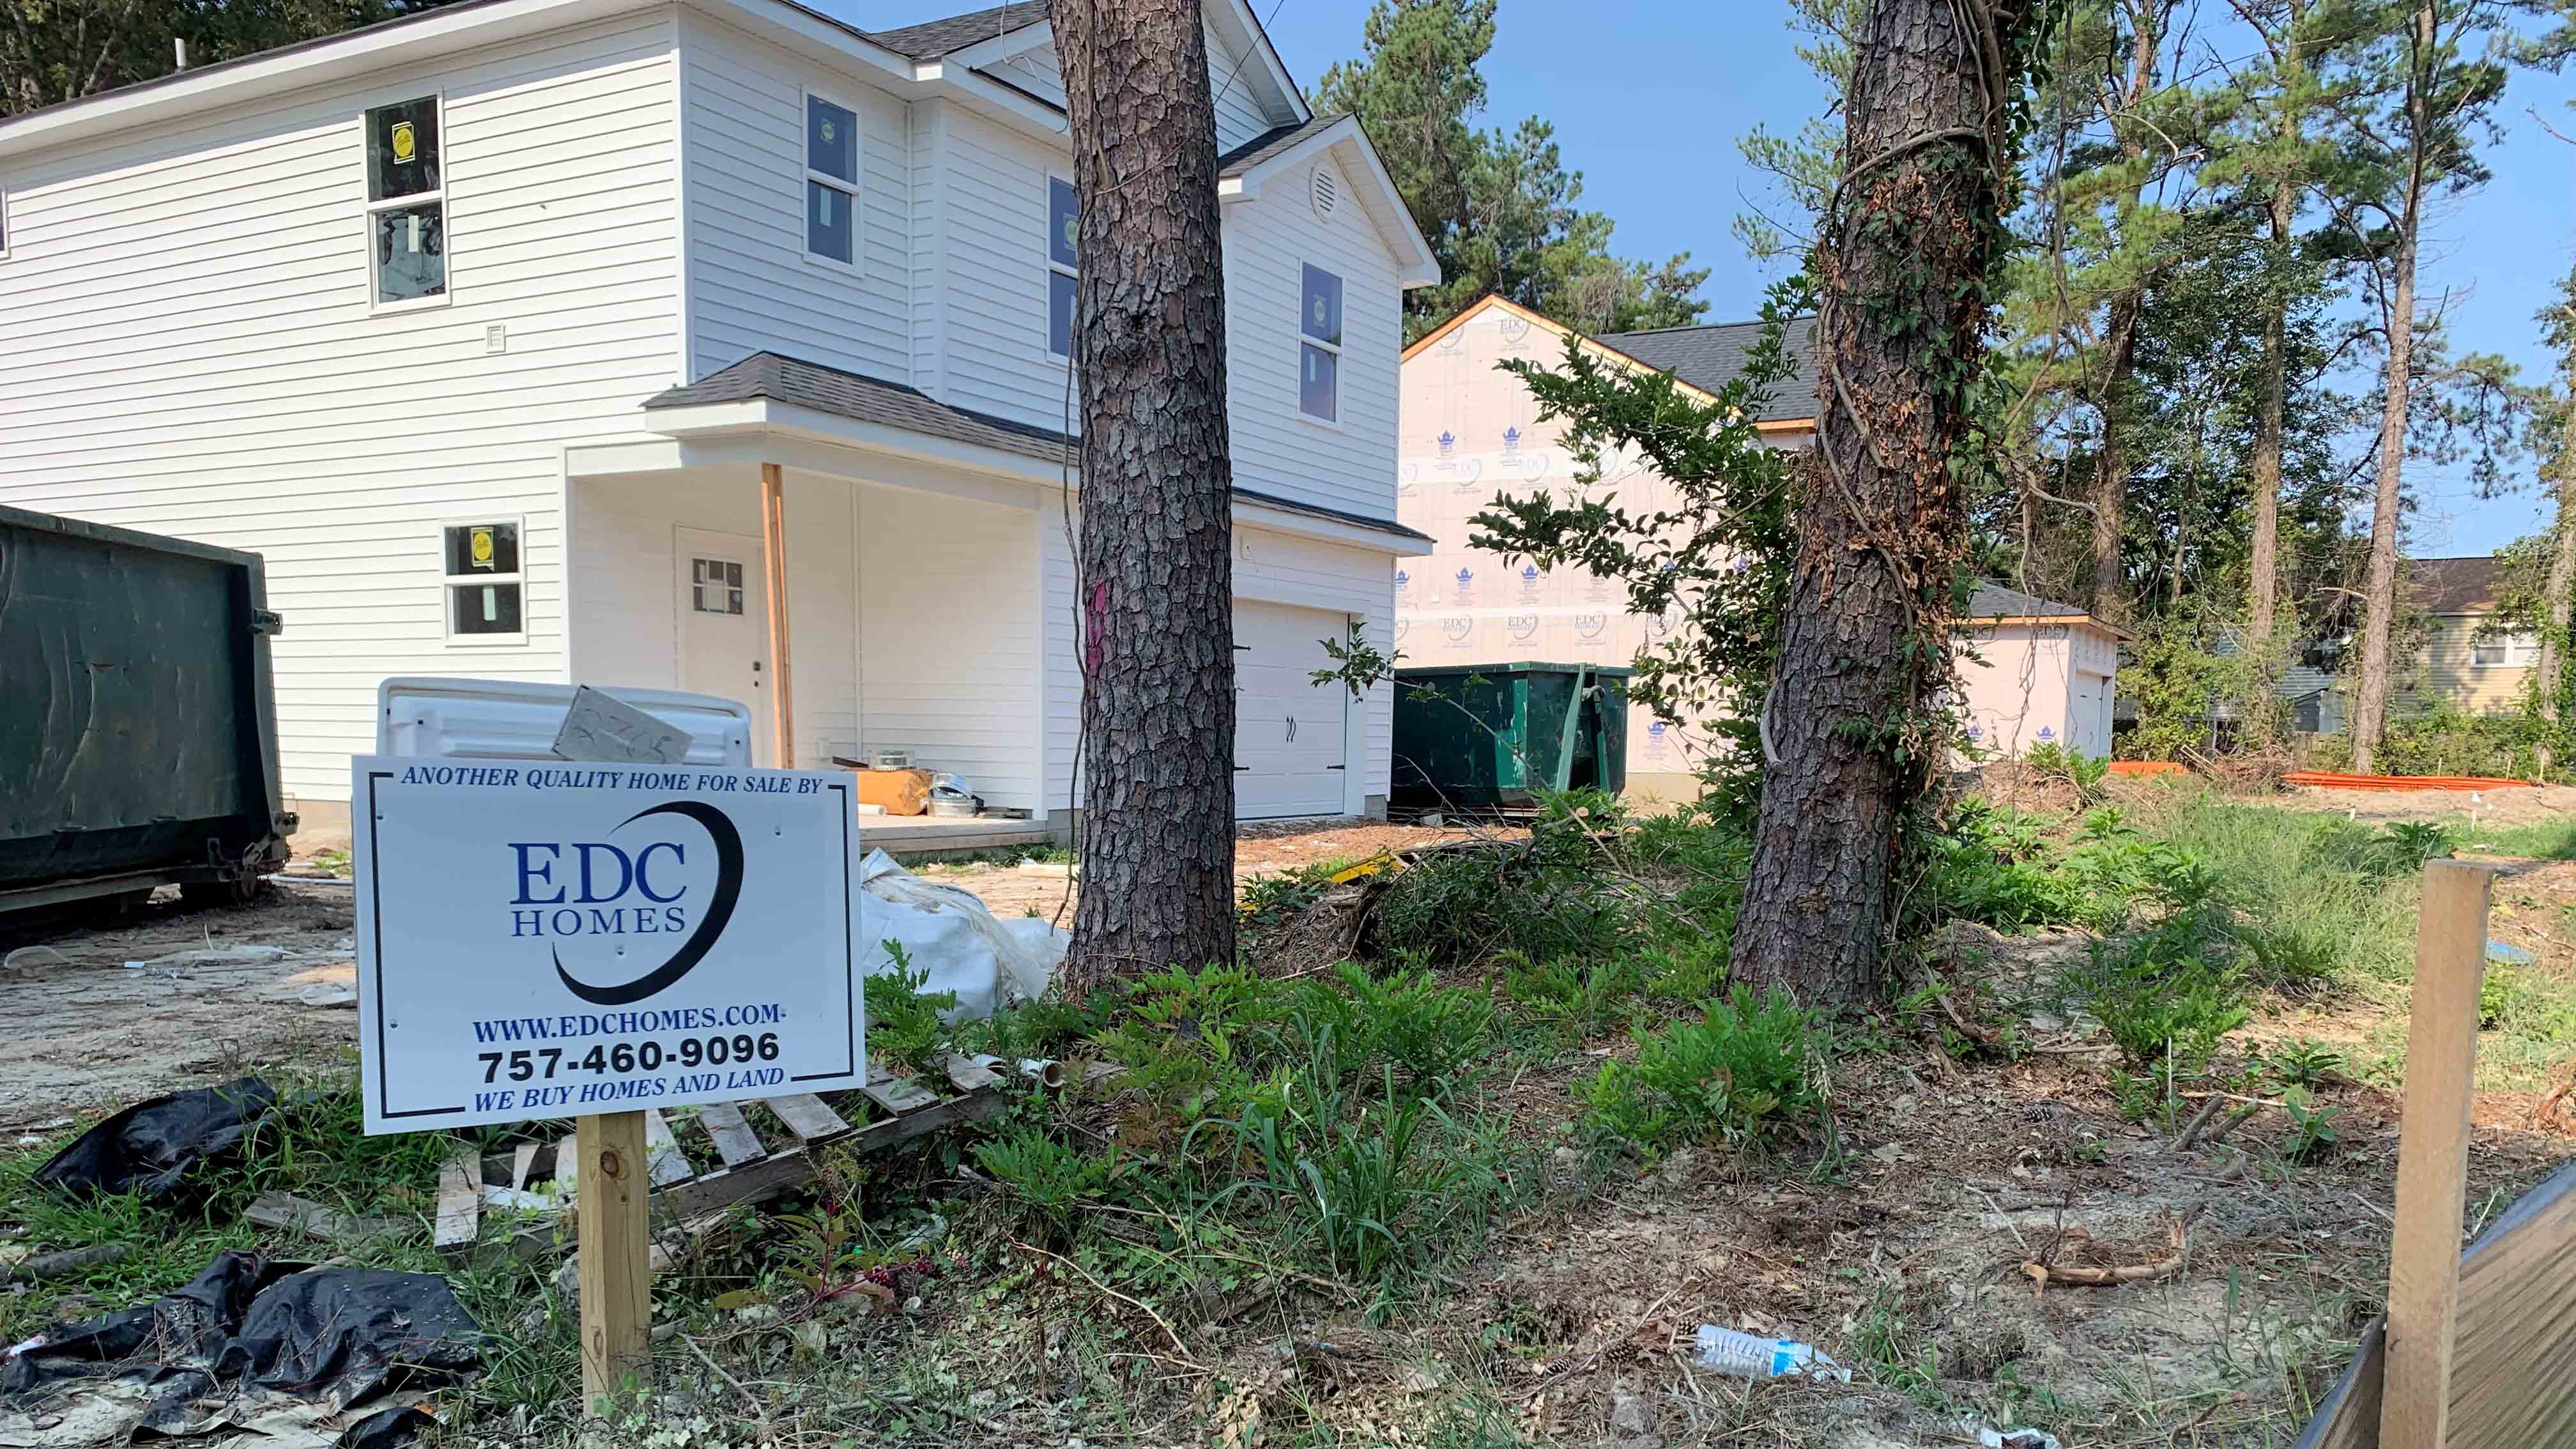 The new report says buying a home is out of reach of many working households in Virginia Beach, which could negatively impact the city’s workforce and business retention. (Photo by Mechelle Hankerson)